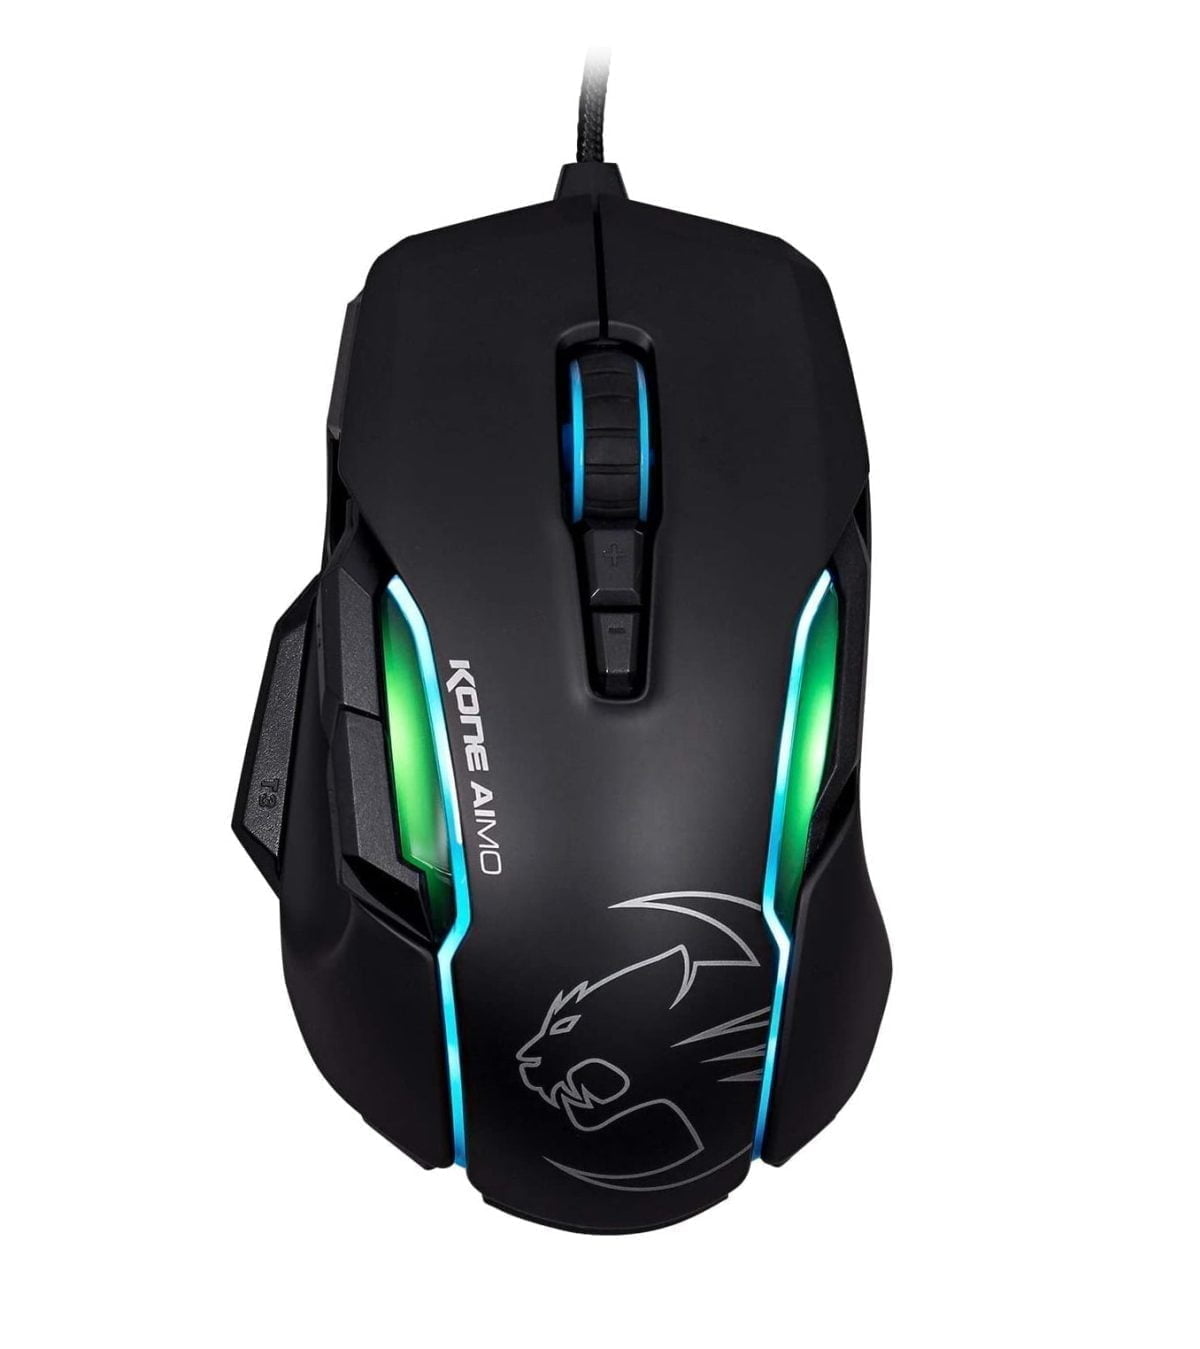 61Lgqdy9Yl. Ac Sl1387 Roccat Https://Youtu.be/Mfk3Bmiiu8C Roccat® Swarm Powered – Comprehensive Driver Suite With A Striking Design And A Stunning Feature Set, The Kone Aimo Channels The Legacy Of Its Predecessor. It Boasts Refined Ergonomics With Enhanced Button Distinction, But What Truly Sets It Apart Is Its Rgba Double Lightguides Powered By The State-Of-The-Art Aimo Intelligent Lighting System. Aimo Is The Vivid Illumination Eco-System From Roccat®. Its Functionality Grows Exponentially Based On The Number Of Aimo-Enabled Devices Connected. It Also Reacts Intuitively And Organically To Your Computing Behavior. Eliminating The Need For Configuration, It Presents A State-Of-The-Art Lighting Scenario Right Out Of The Box, For A Completely Fluid, Next-Gen Experience. The Kone Aimo Features A Tri-Button Thumb Zone For A New And Even Greater Level Of Control. It Includes Two Wide Buttons Suitable For All Hand Sizes, Plus An Ergonomic Lower Button Set To Easy-Shift[+]™ By Default. Easy-Shift[+]™ Is The World-Famous Button Duplicator Technology That Lets You Assign A Secondary Function To The Mouse'S Buttons. It'S Easy To Program And Has Options For Simple Commands And Complex Macros. Gaming Mouse Roccat - Kone Aimo Rgba Smart Customization Gaming Mouse (Black) 23 Programmable Keys, Designed In Germany